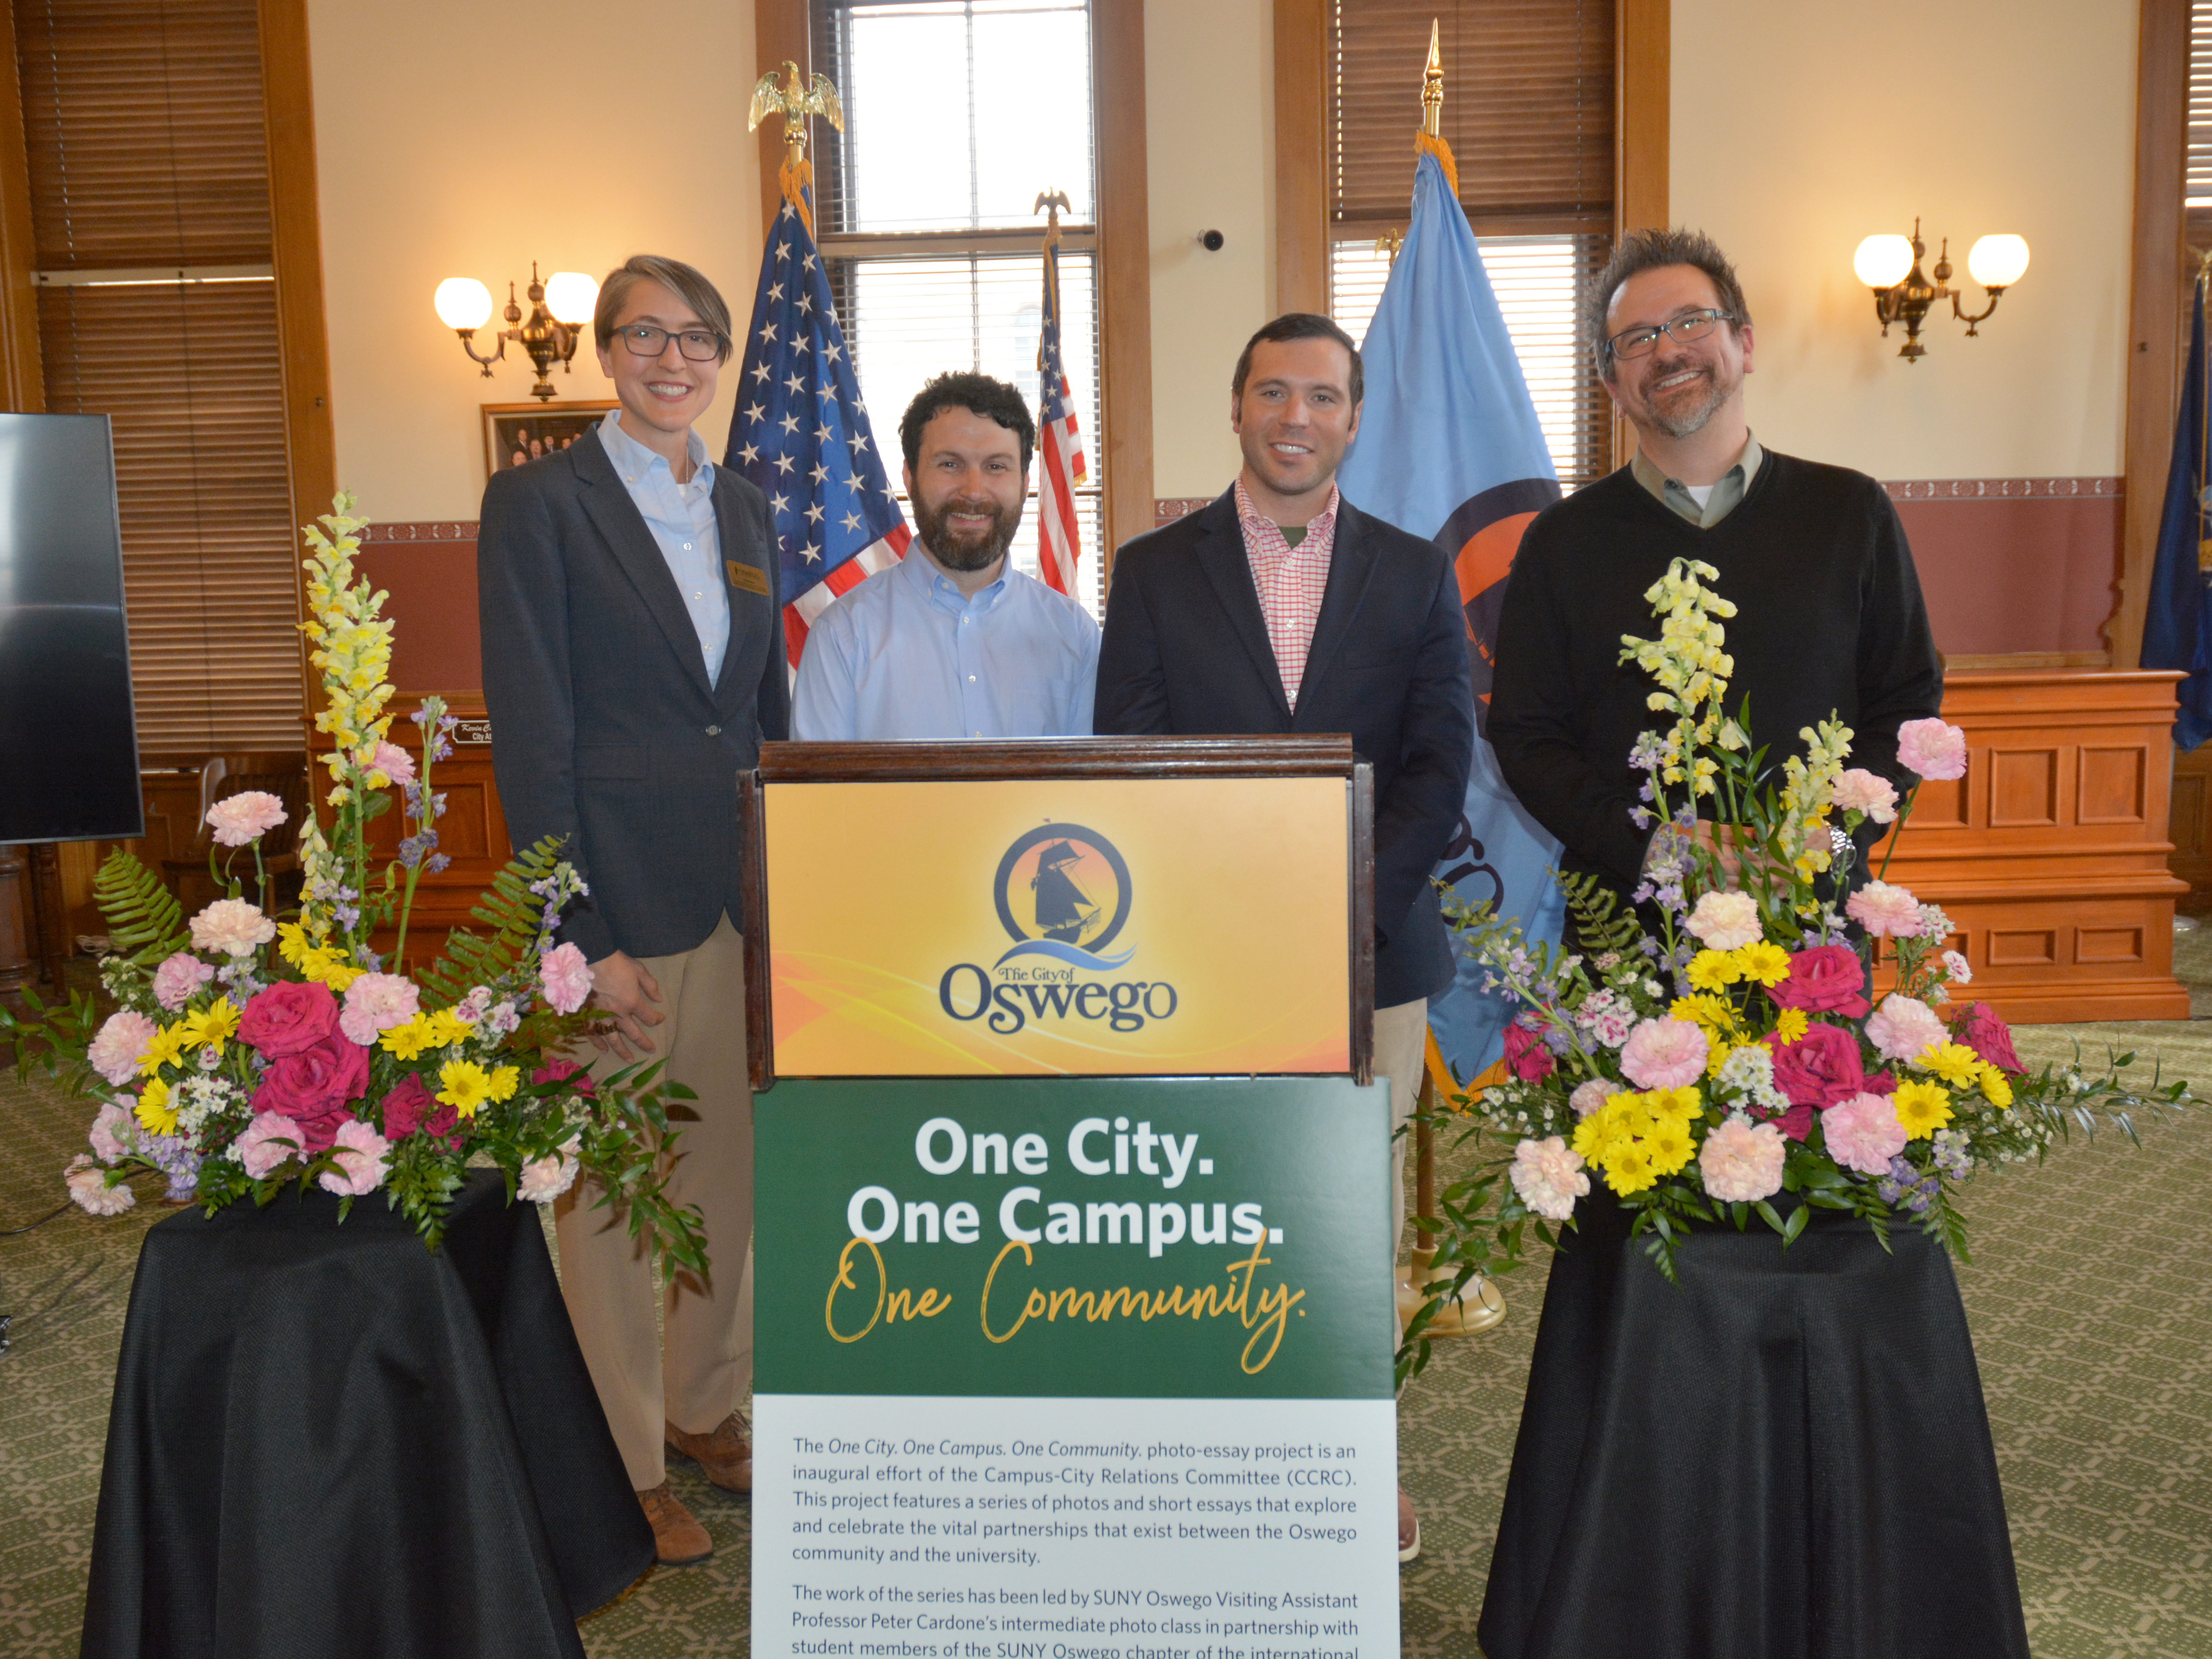 A May 2 reception celebrated SUNY Oswego's student-produced writing and photography exhibit, "One City, One Campus, One Community" exploring the vital partnership between the Oswego community and the university, and showcasing the ongoing collaborative work of the Campus-City Relations Committee.